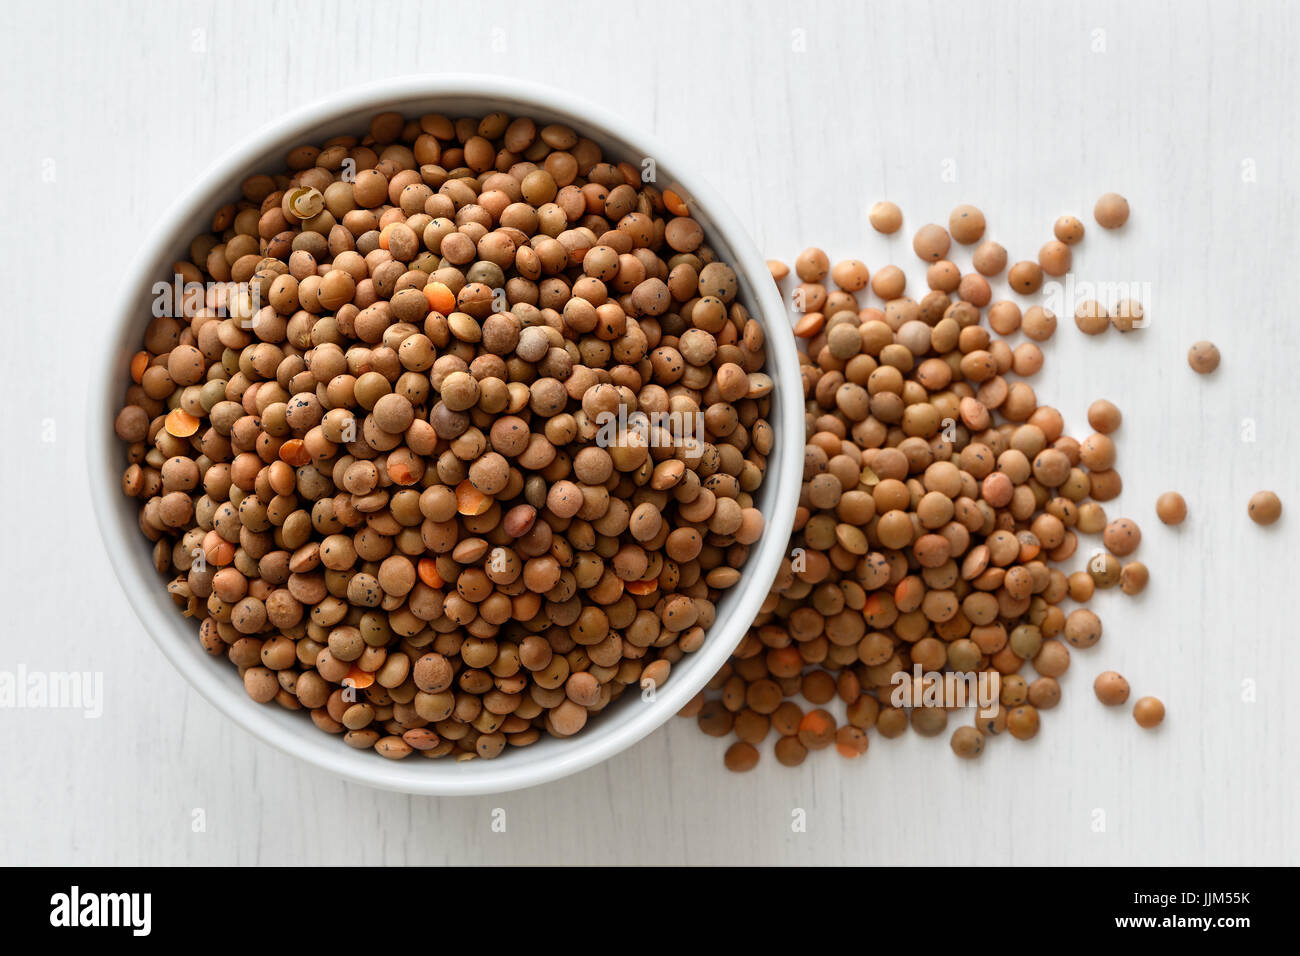 Dry unpeeled red lentils in white ceramic bowl isolated on painted white wood from above. Spilled lentils. Stock Photo